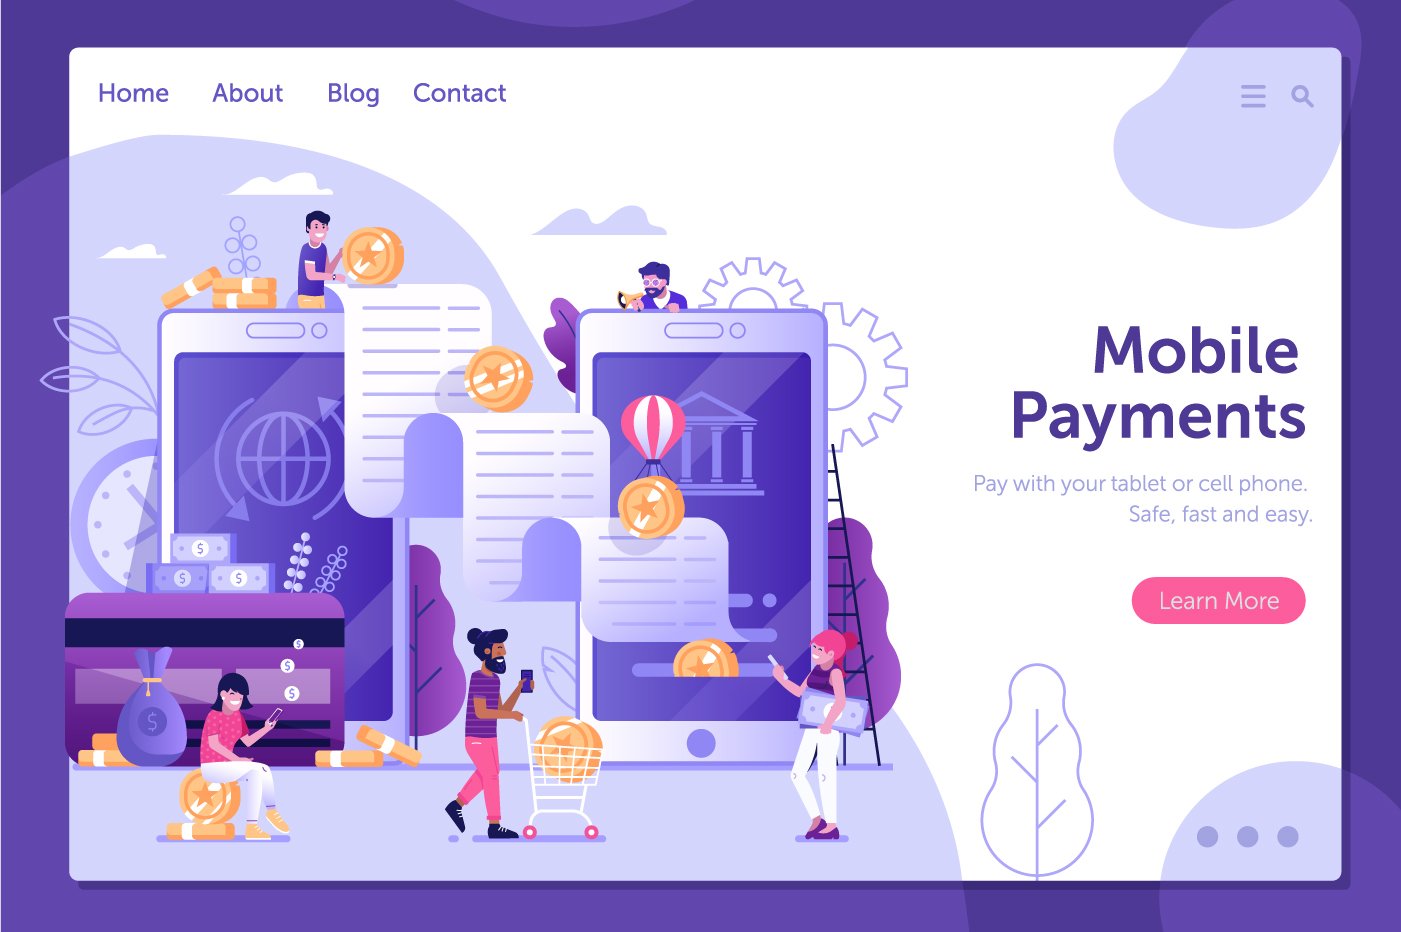 A landing page for a mobile payment app.